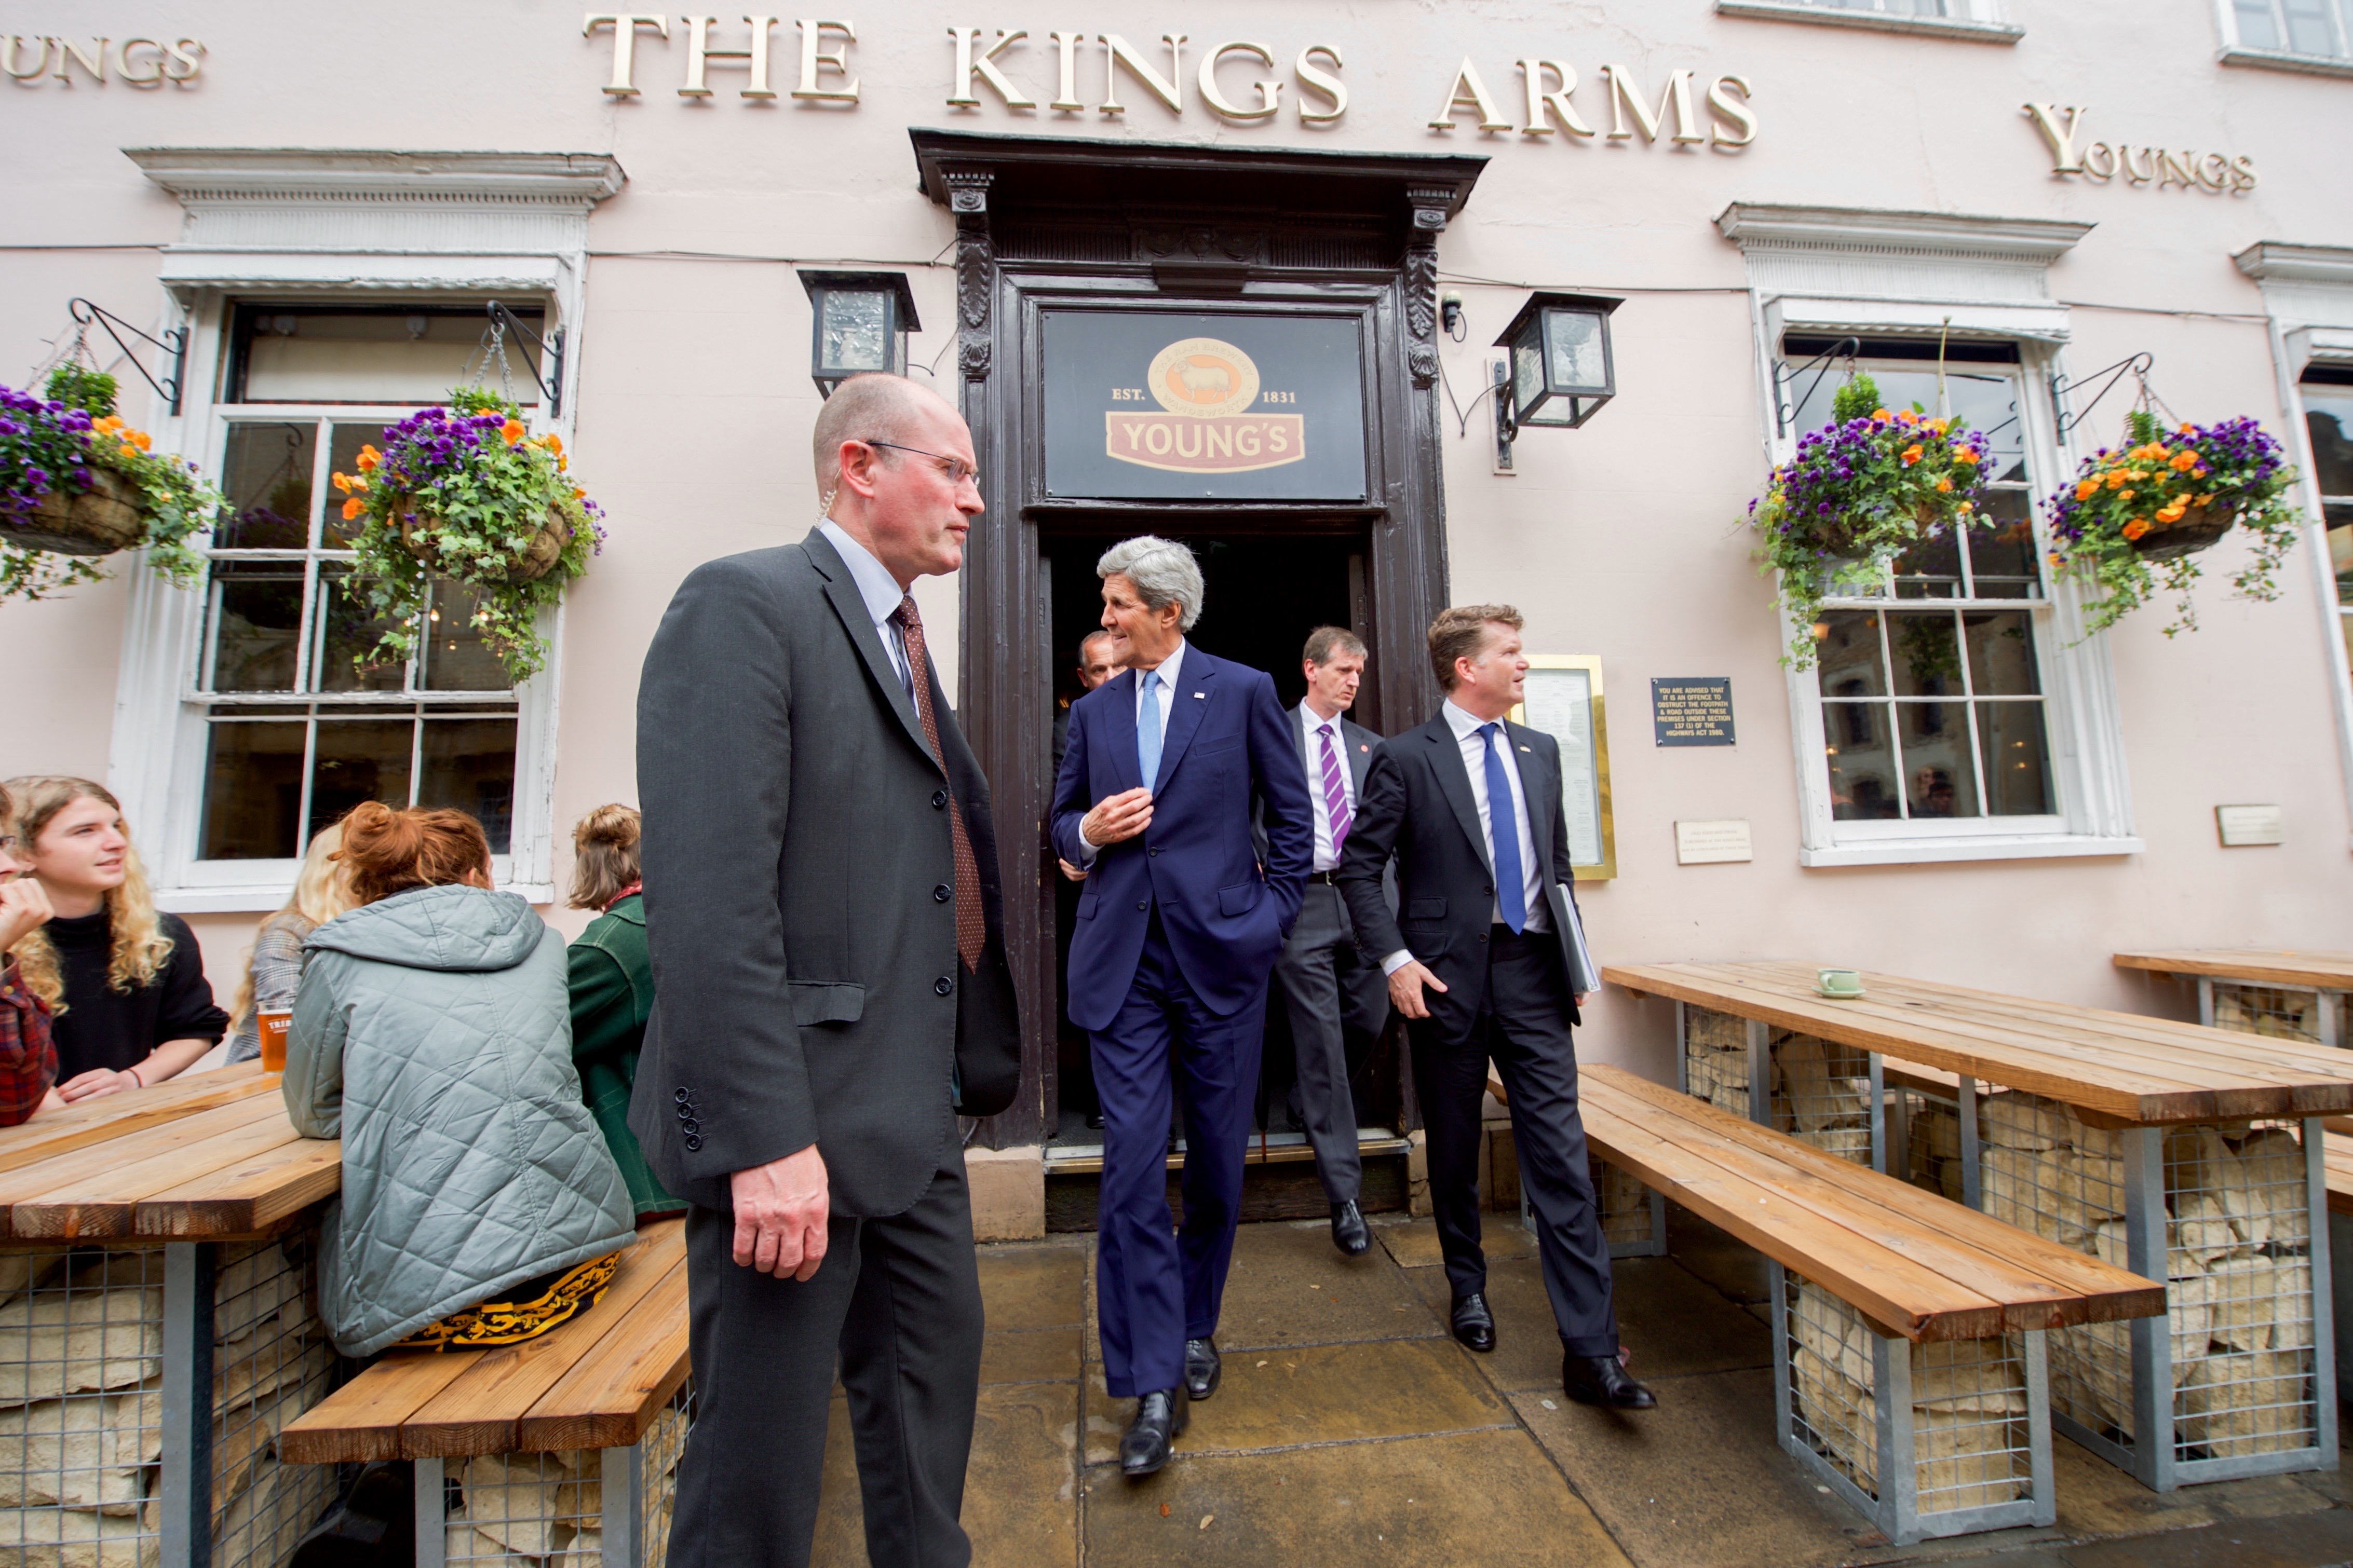 King's Arms, Oxford - Wikipedia